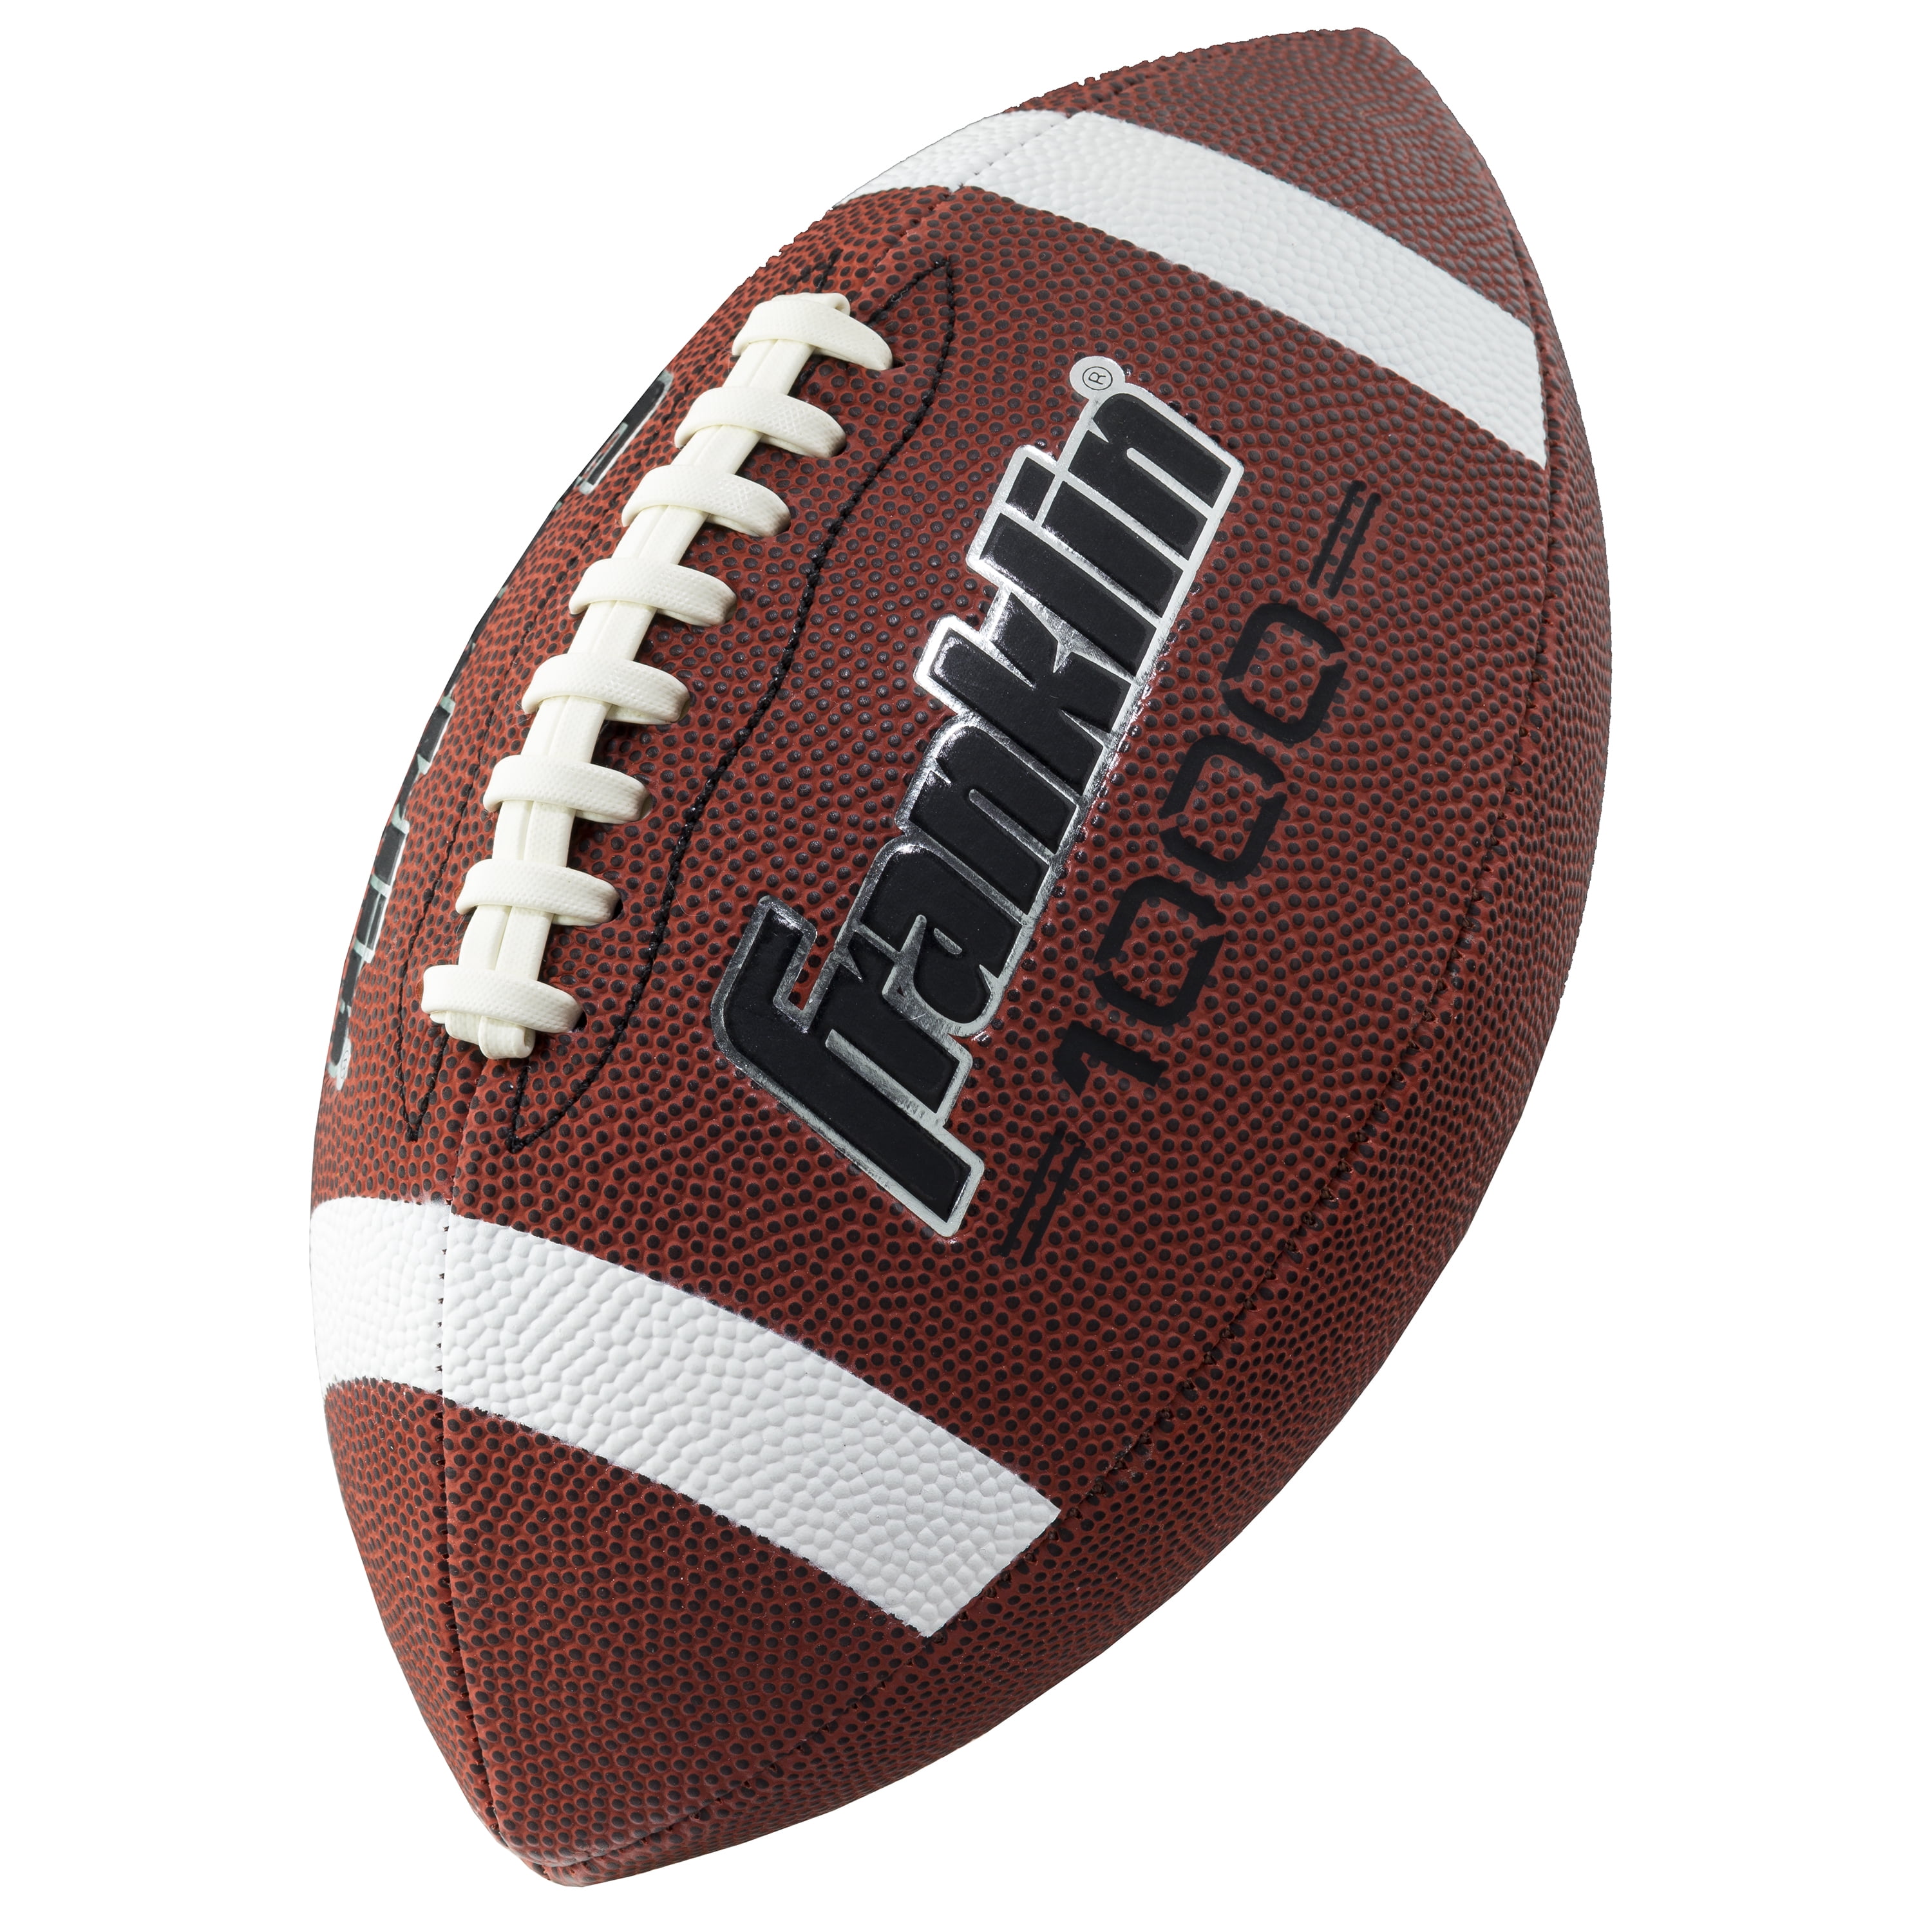 Junior Size Football Franklin Sports Kids NCAA Youth Football Official College Team Football with Team Logos